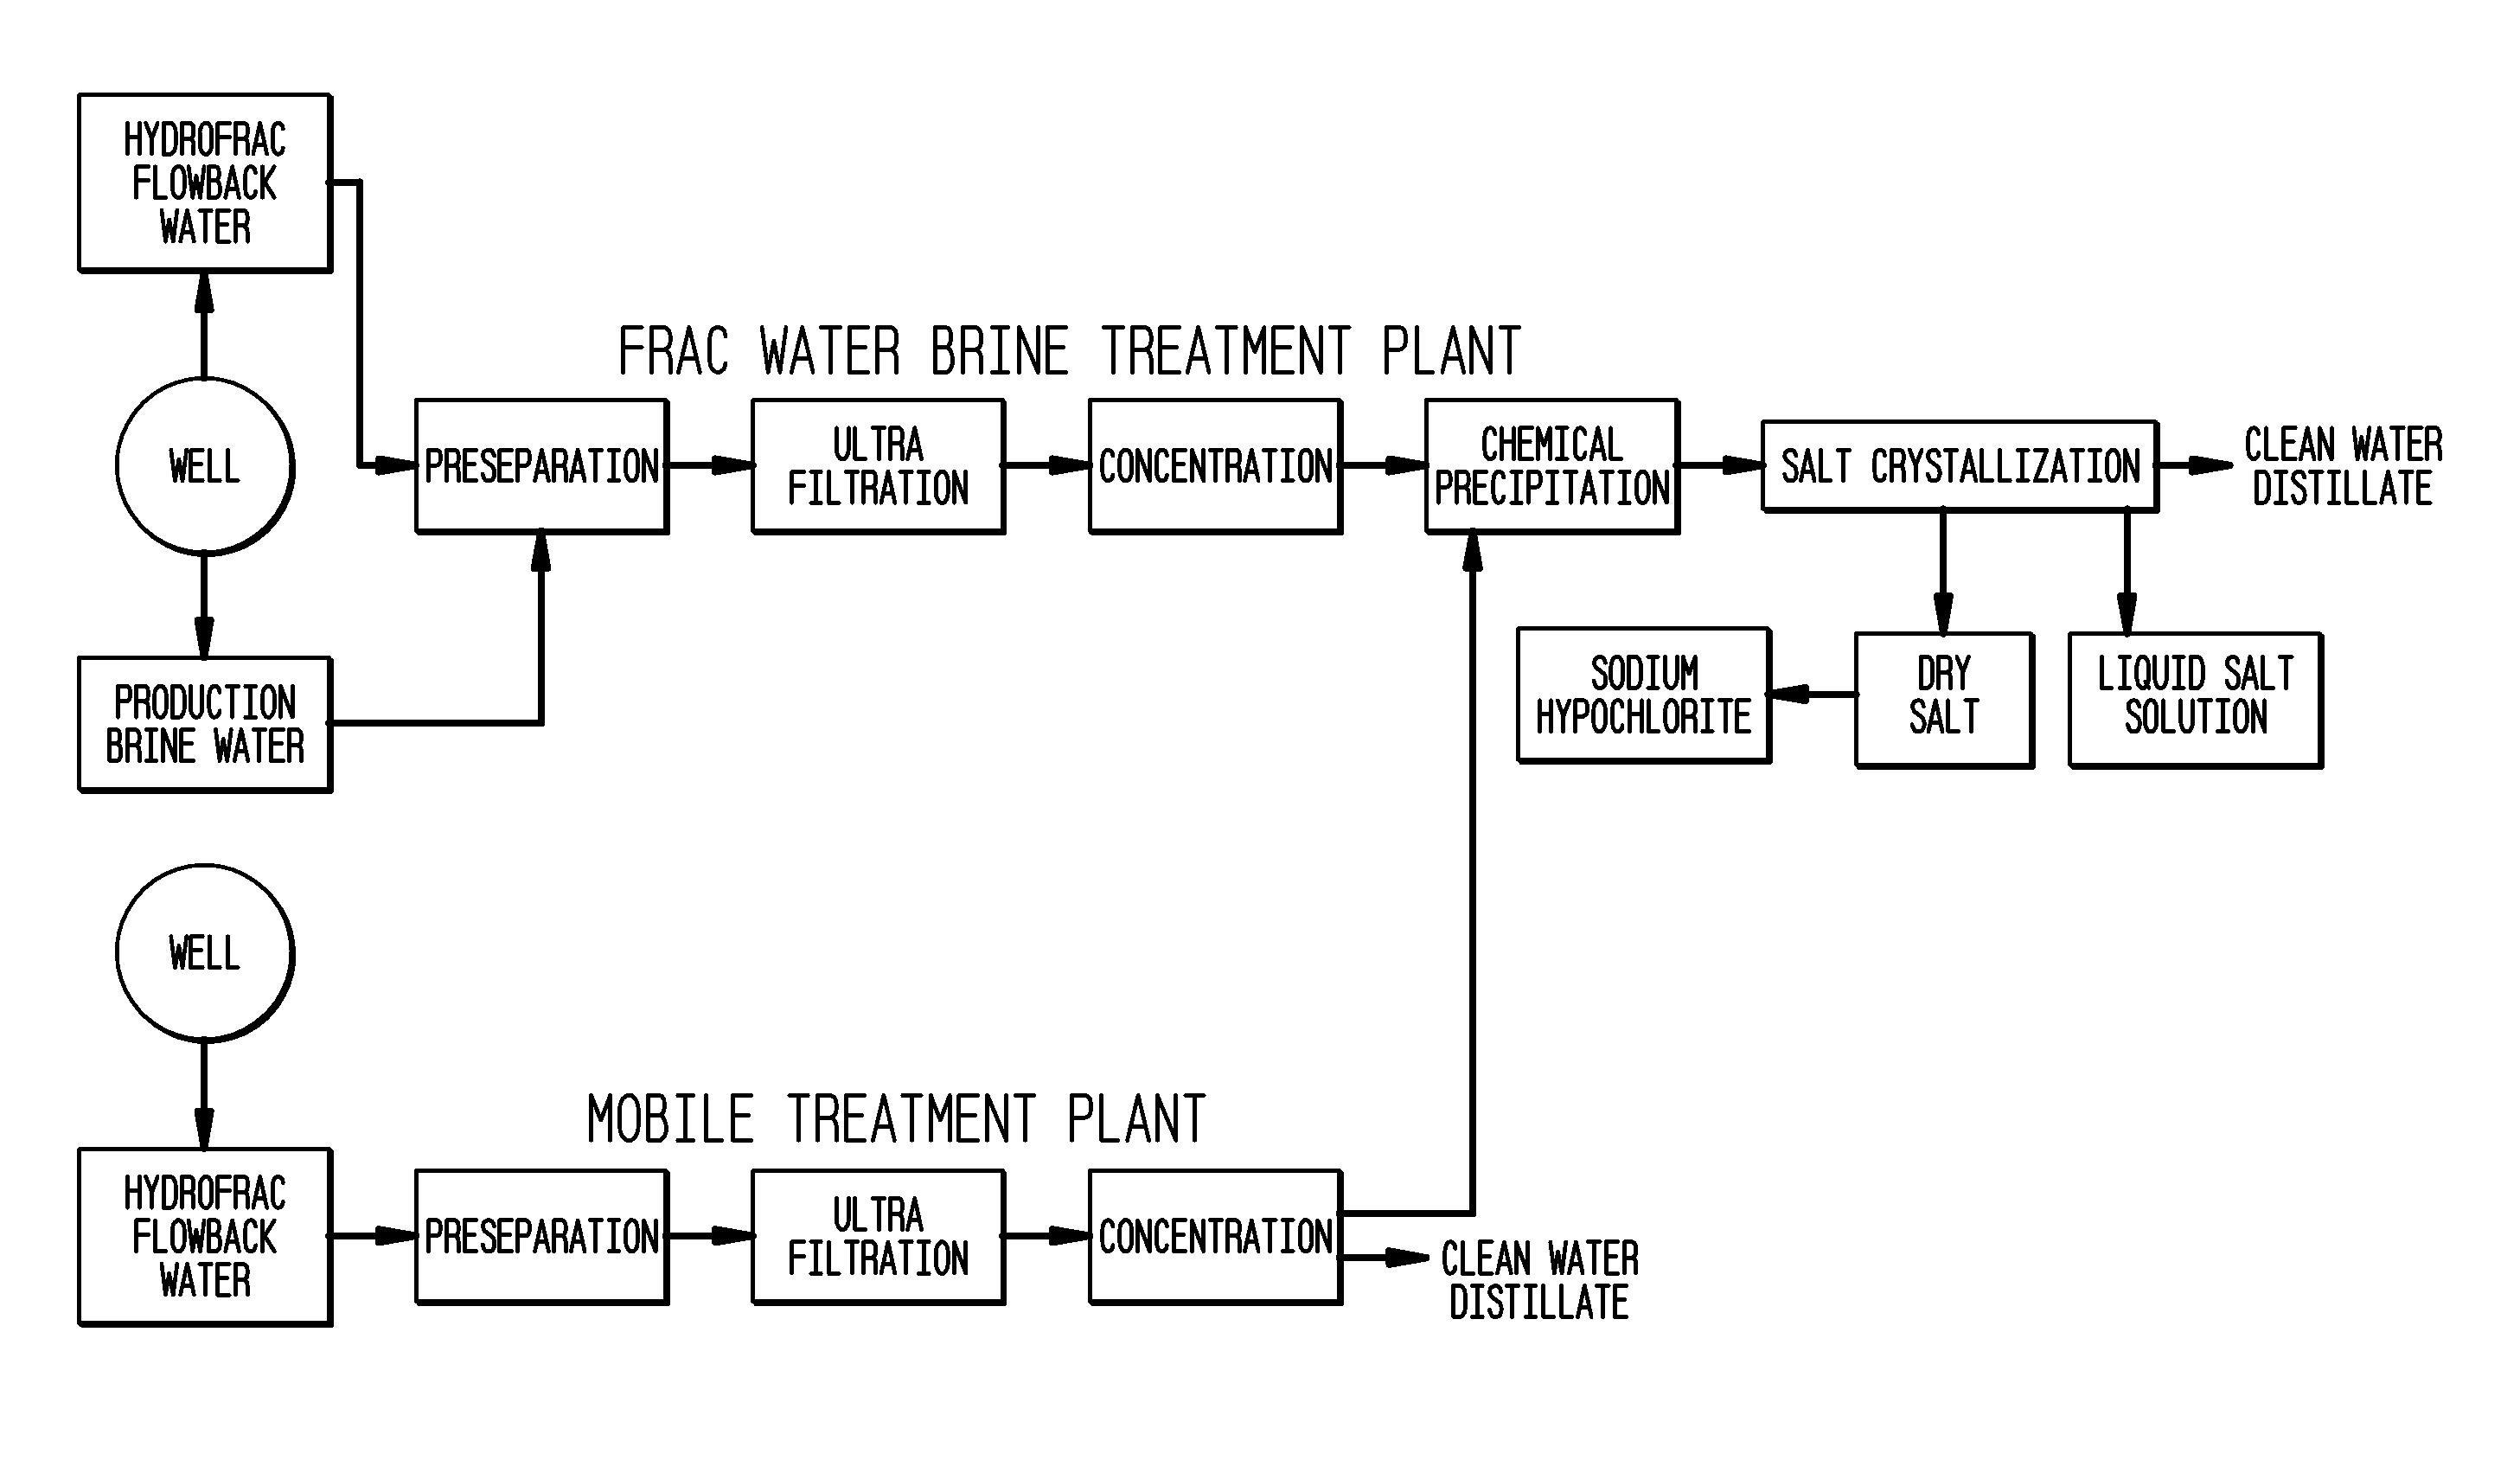 Method of making pure salt from FRAC-water/wastewater